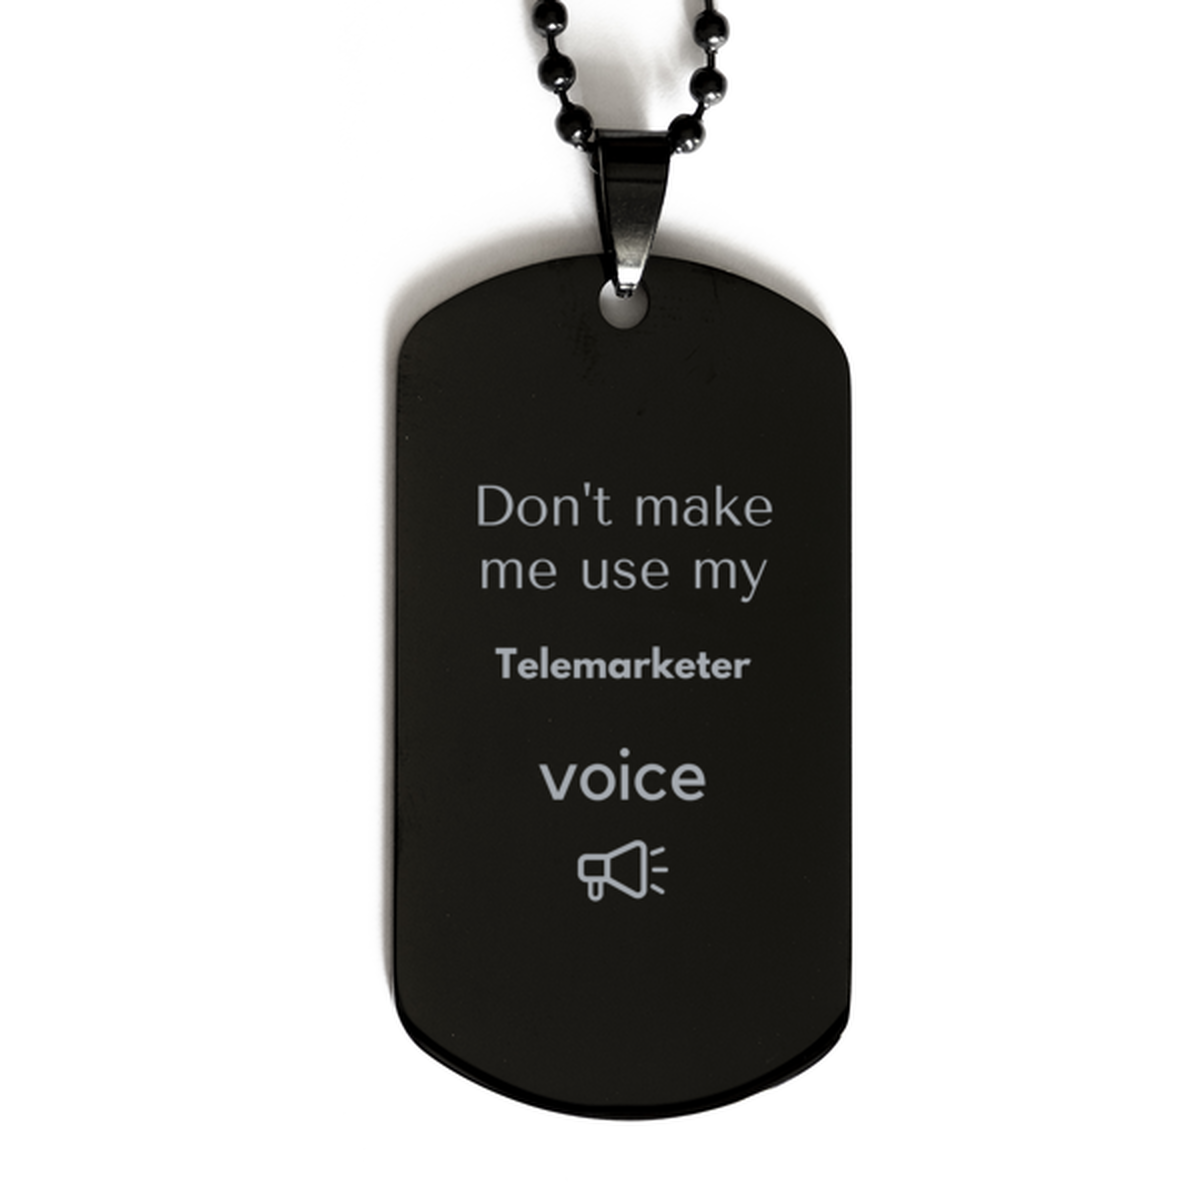 Don't make me use my Telemarketer voice, Sarcasm Telemarketer Gifts, Christmas Telemarketer Black Dog Tag Birthday Unique Gifts For Telemarketer Coworkers, Men, Women, Colleague, Friends